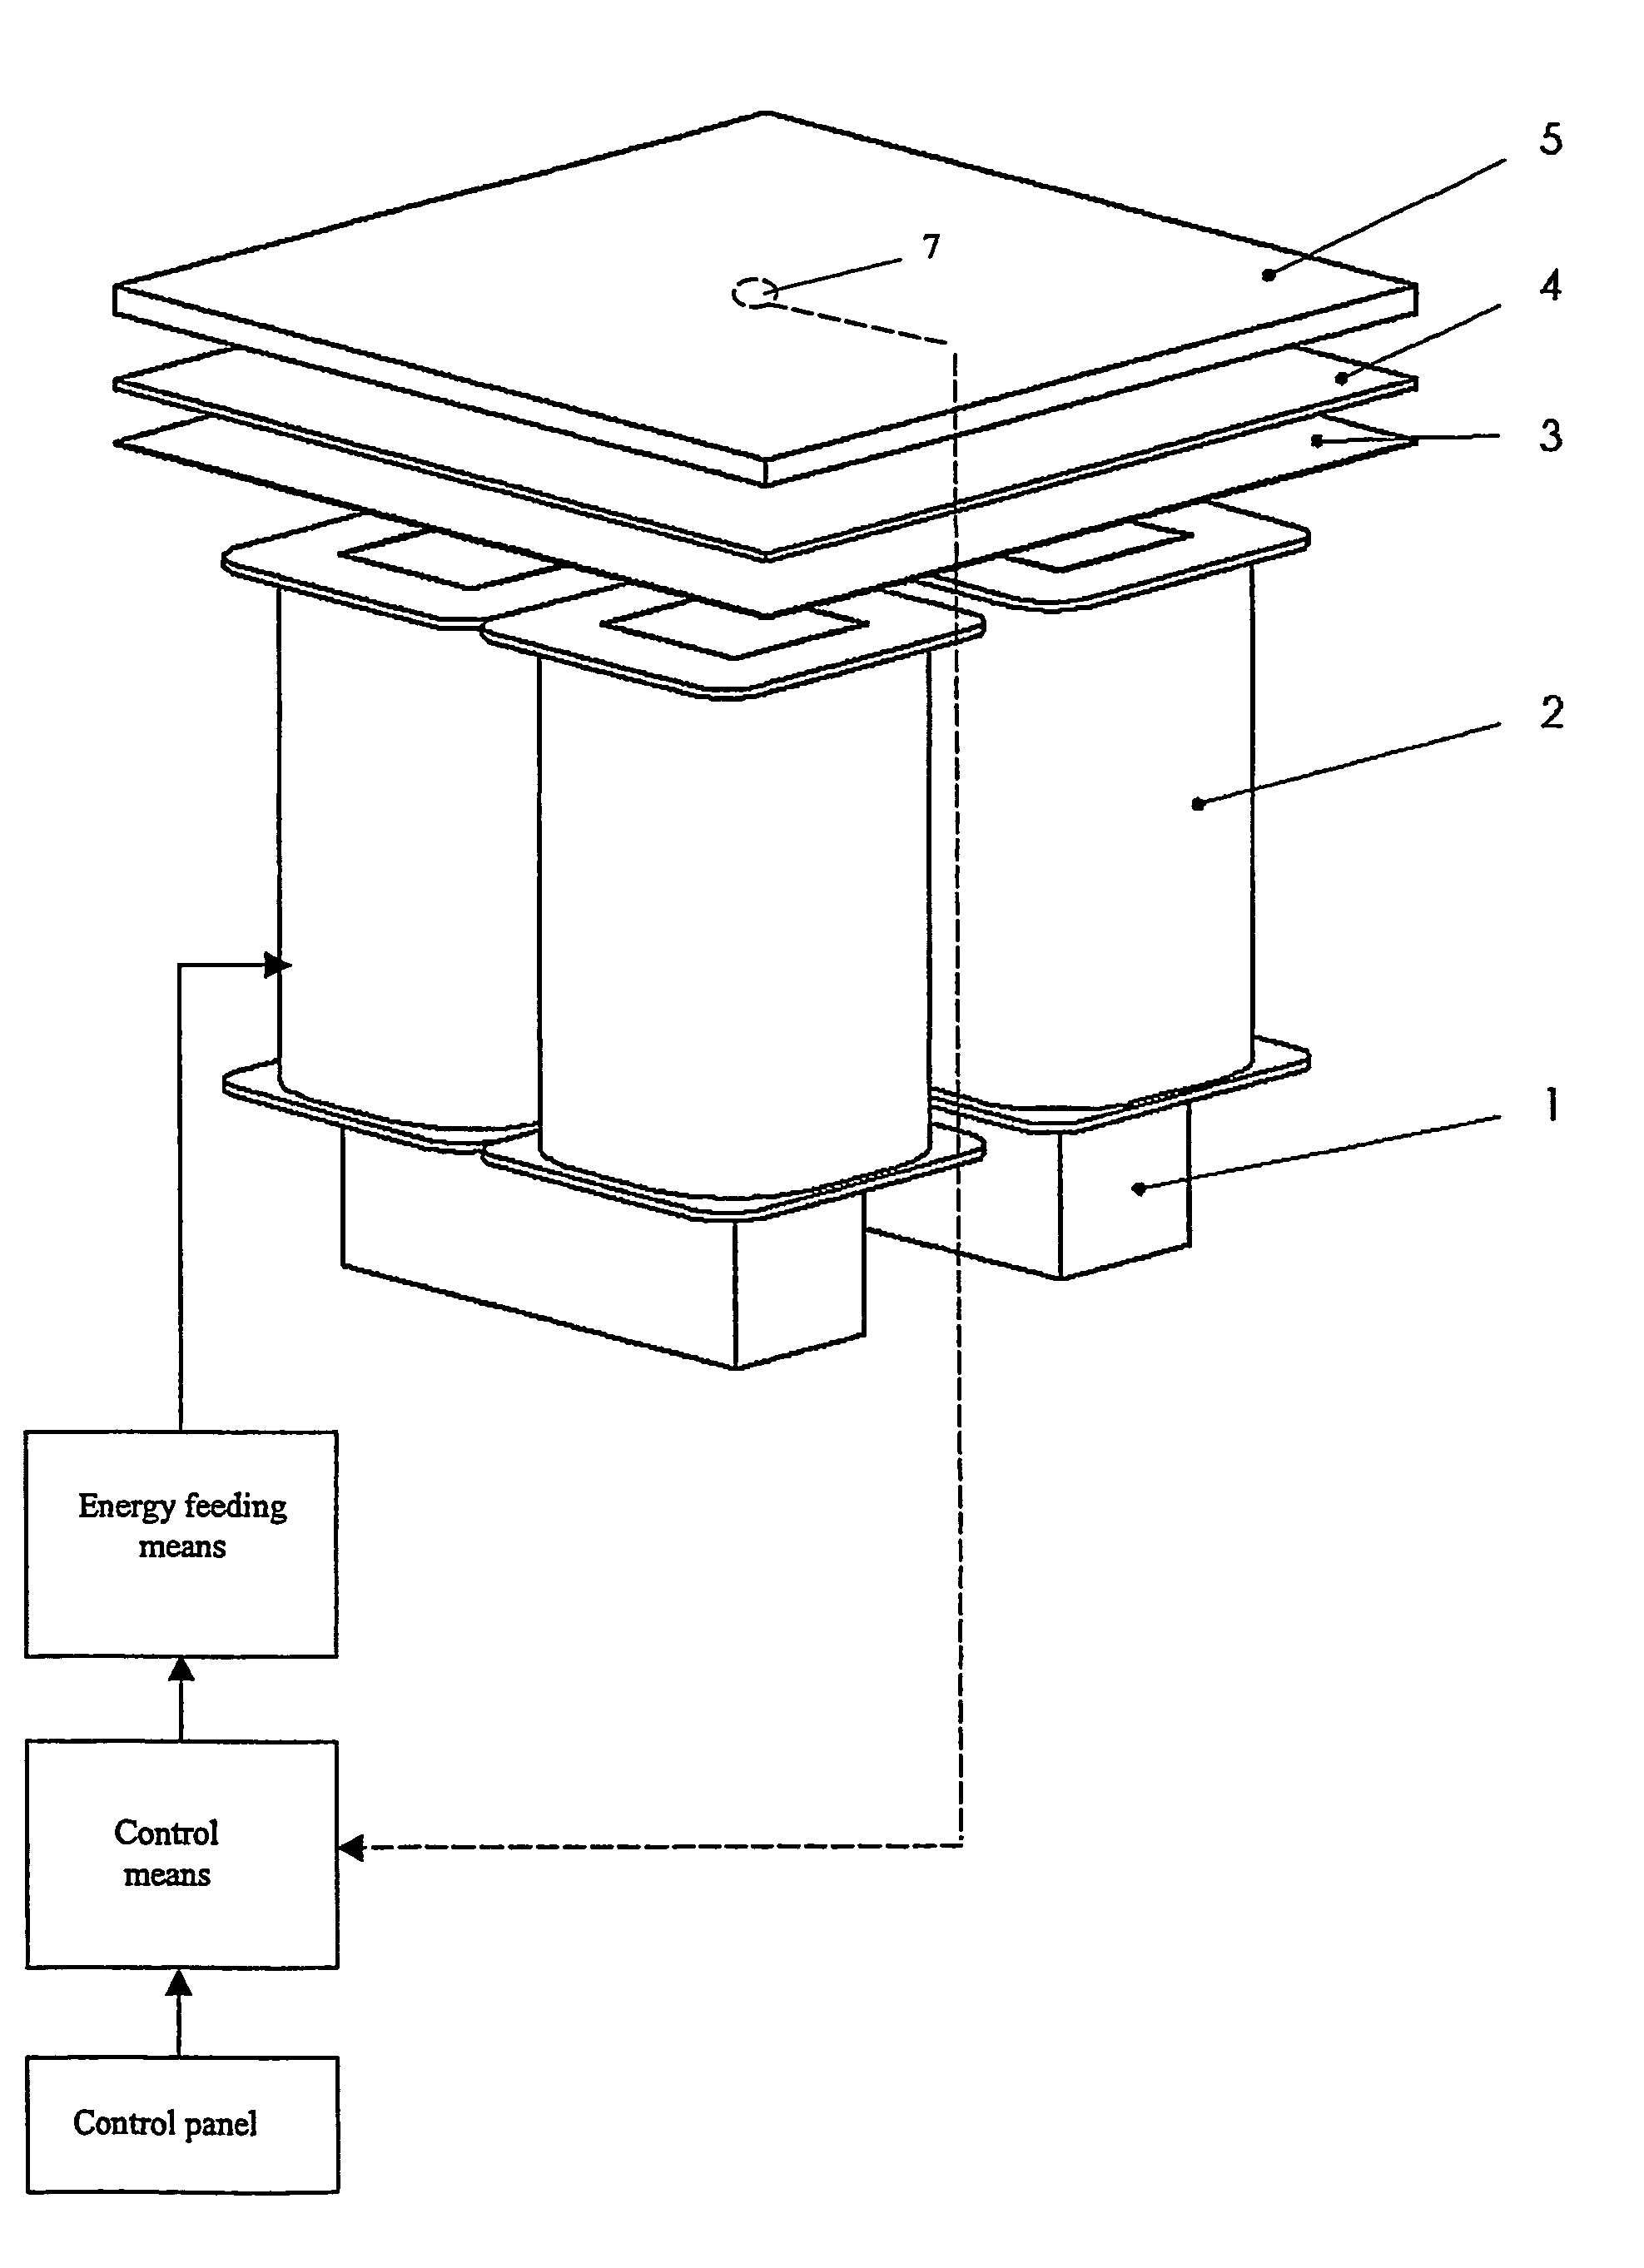 Frying hob arrangement with induction heating